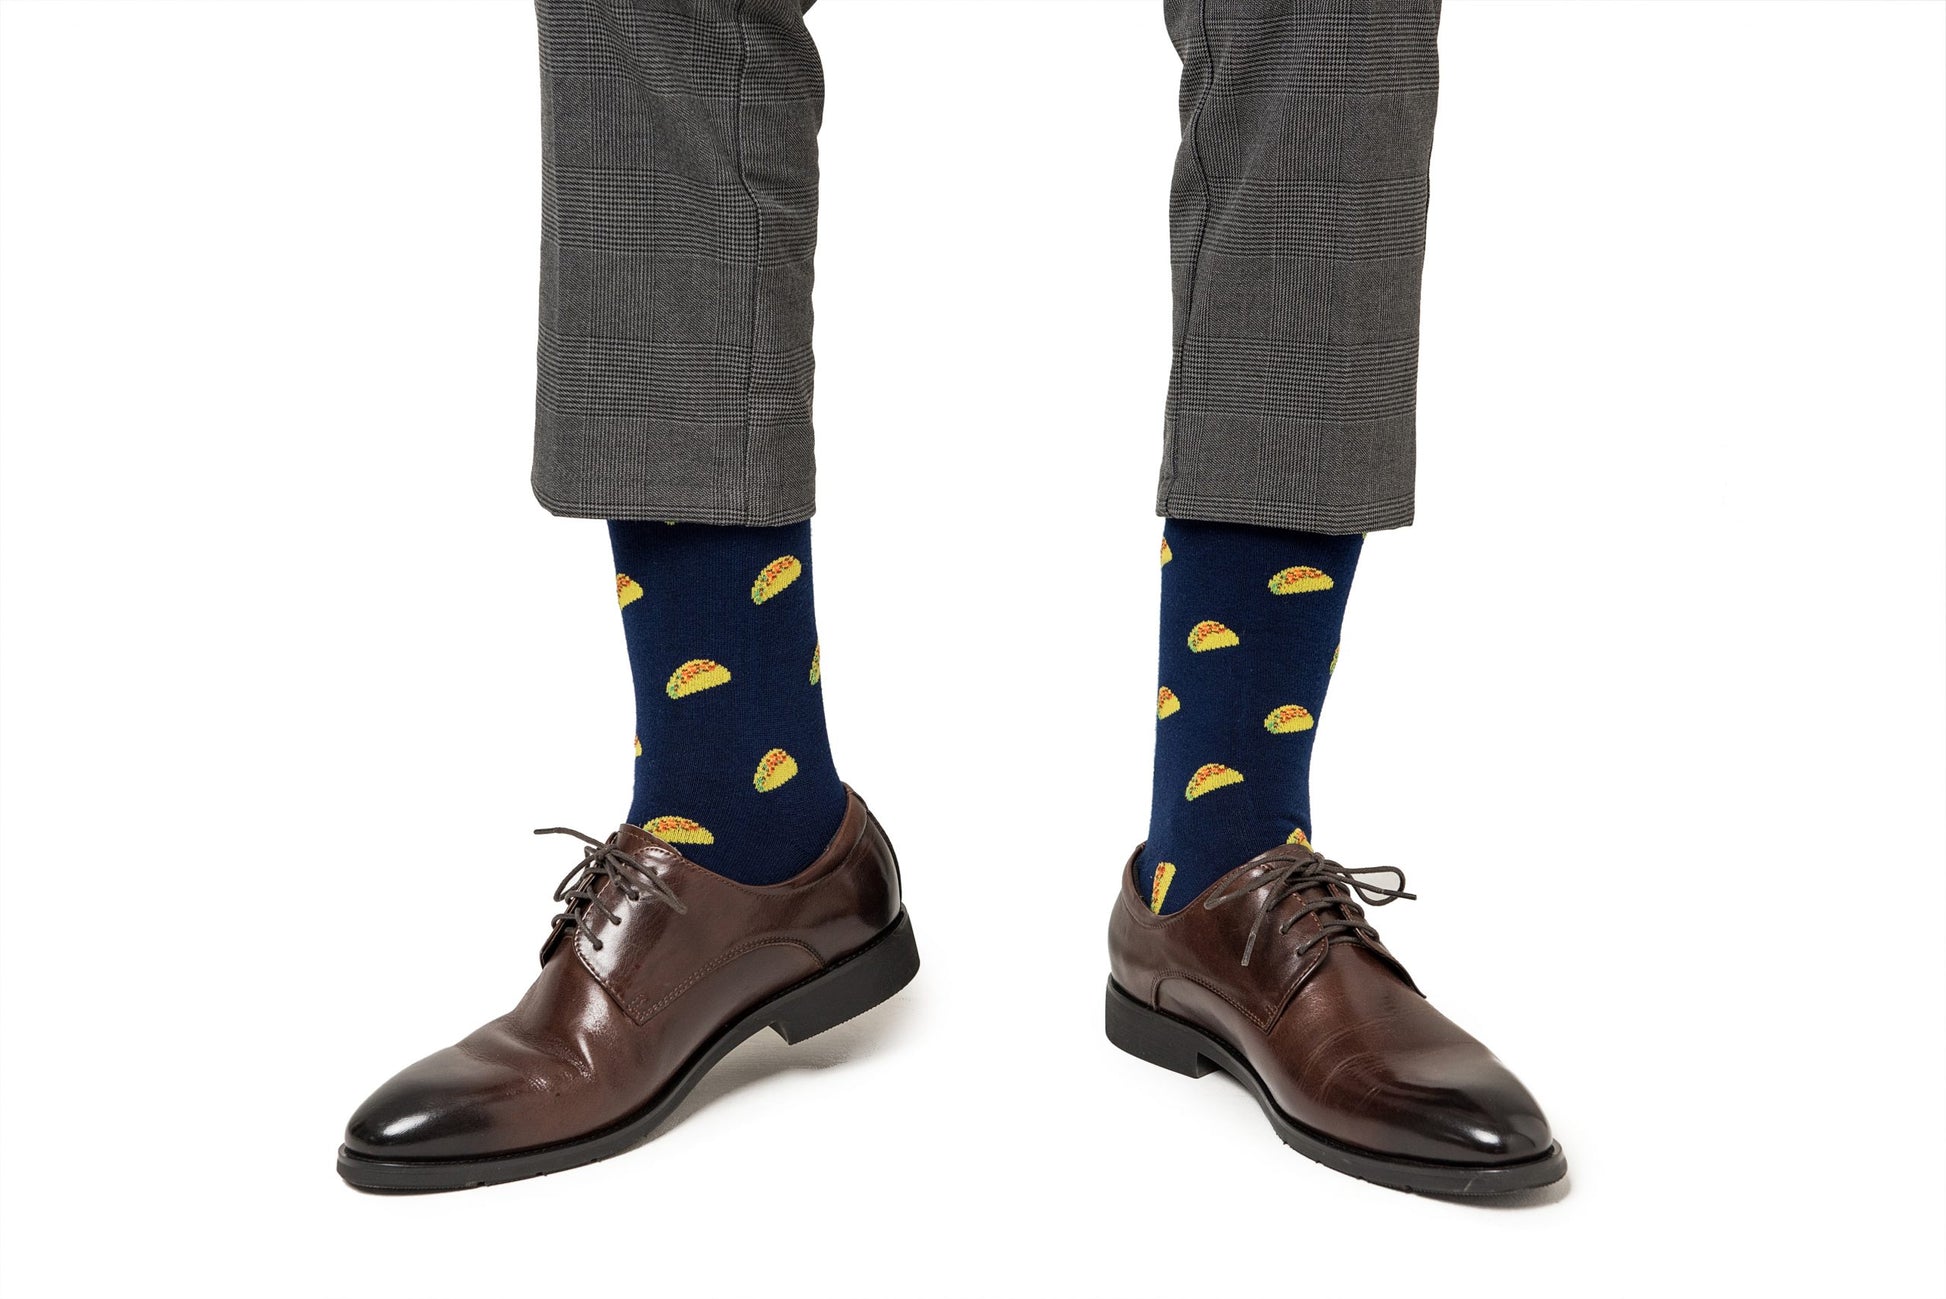 A person wearing dark brown leather shoes and Taco Socks adorned with flavor-packed yellow taco prints, paired with grey trousers.